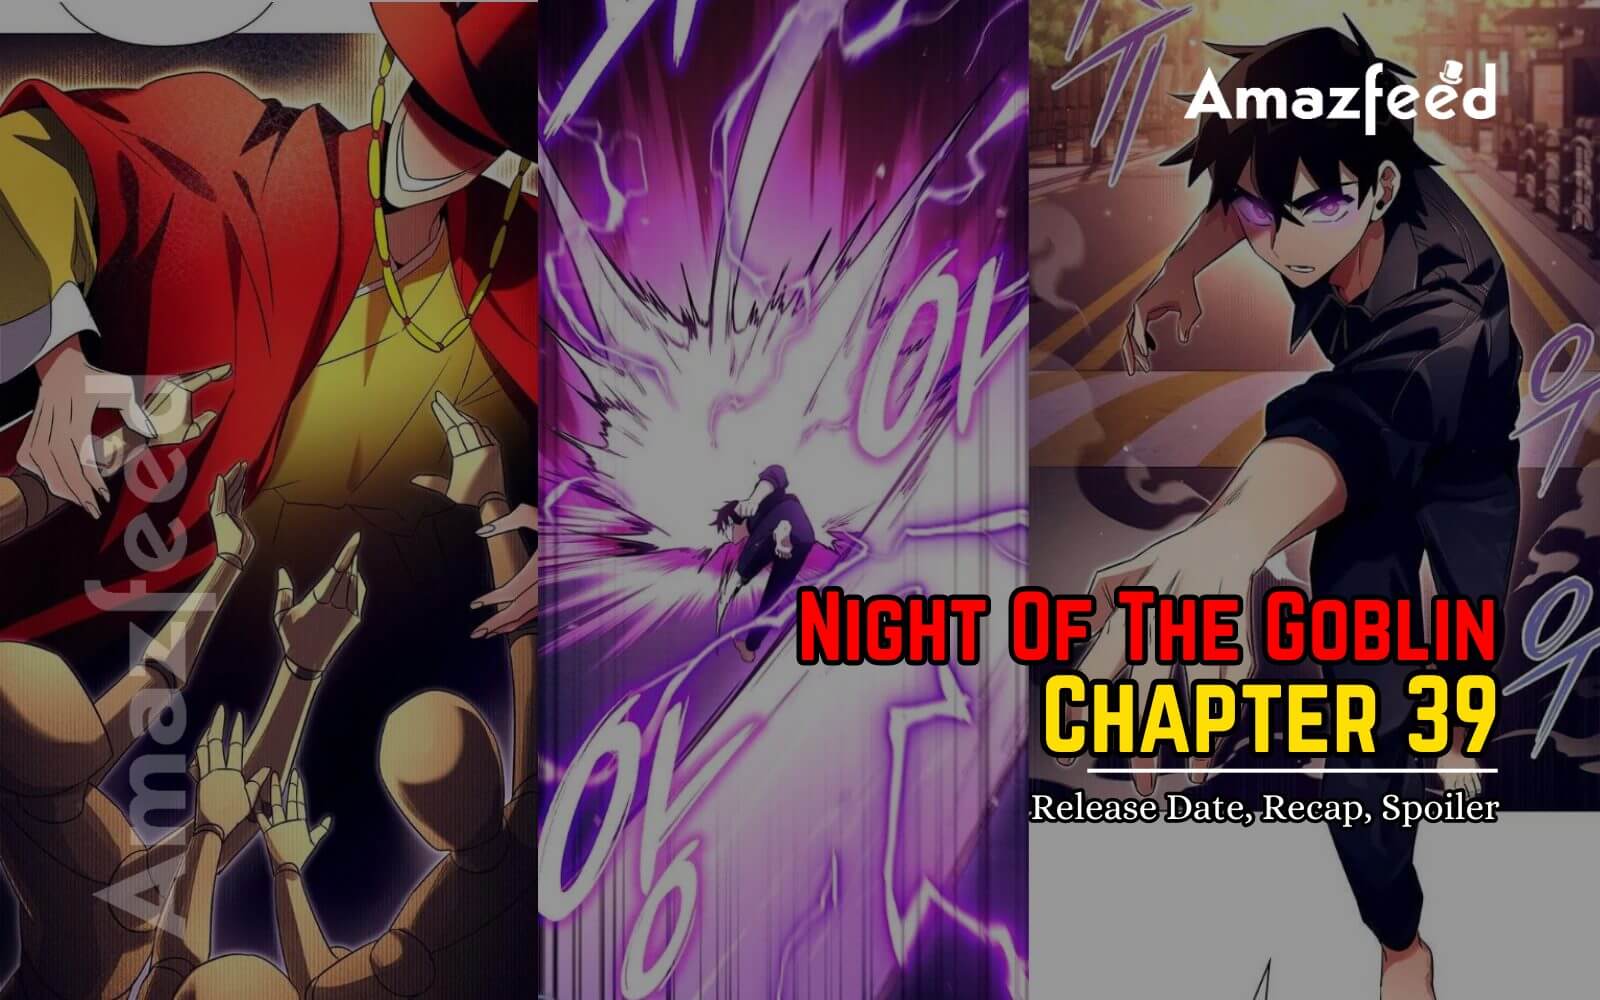 Night Of The Goblin Chapter 39 Release Date